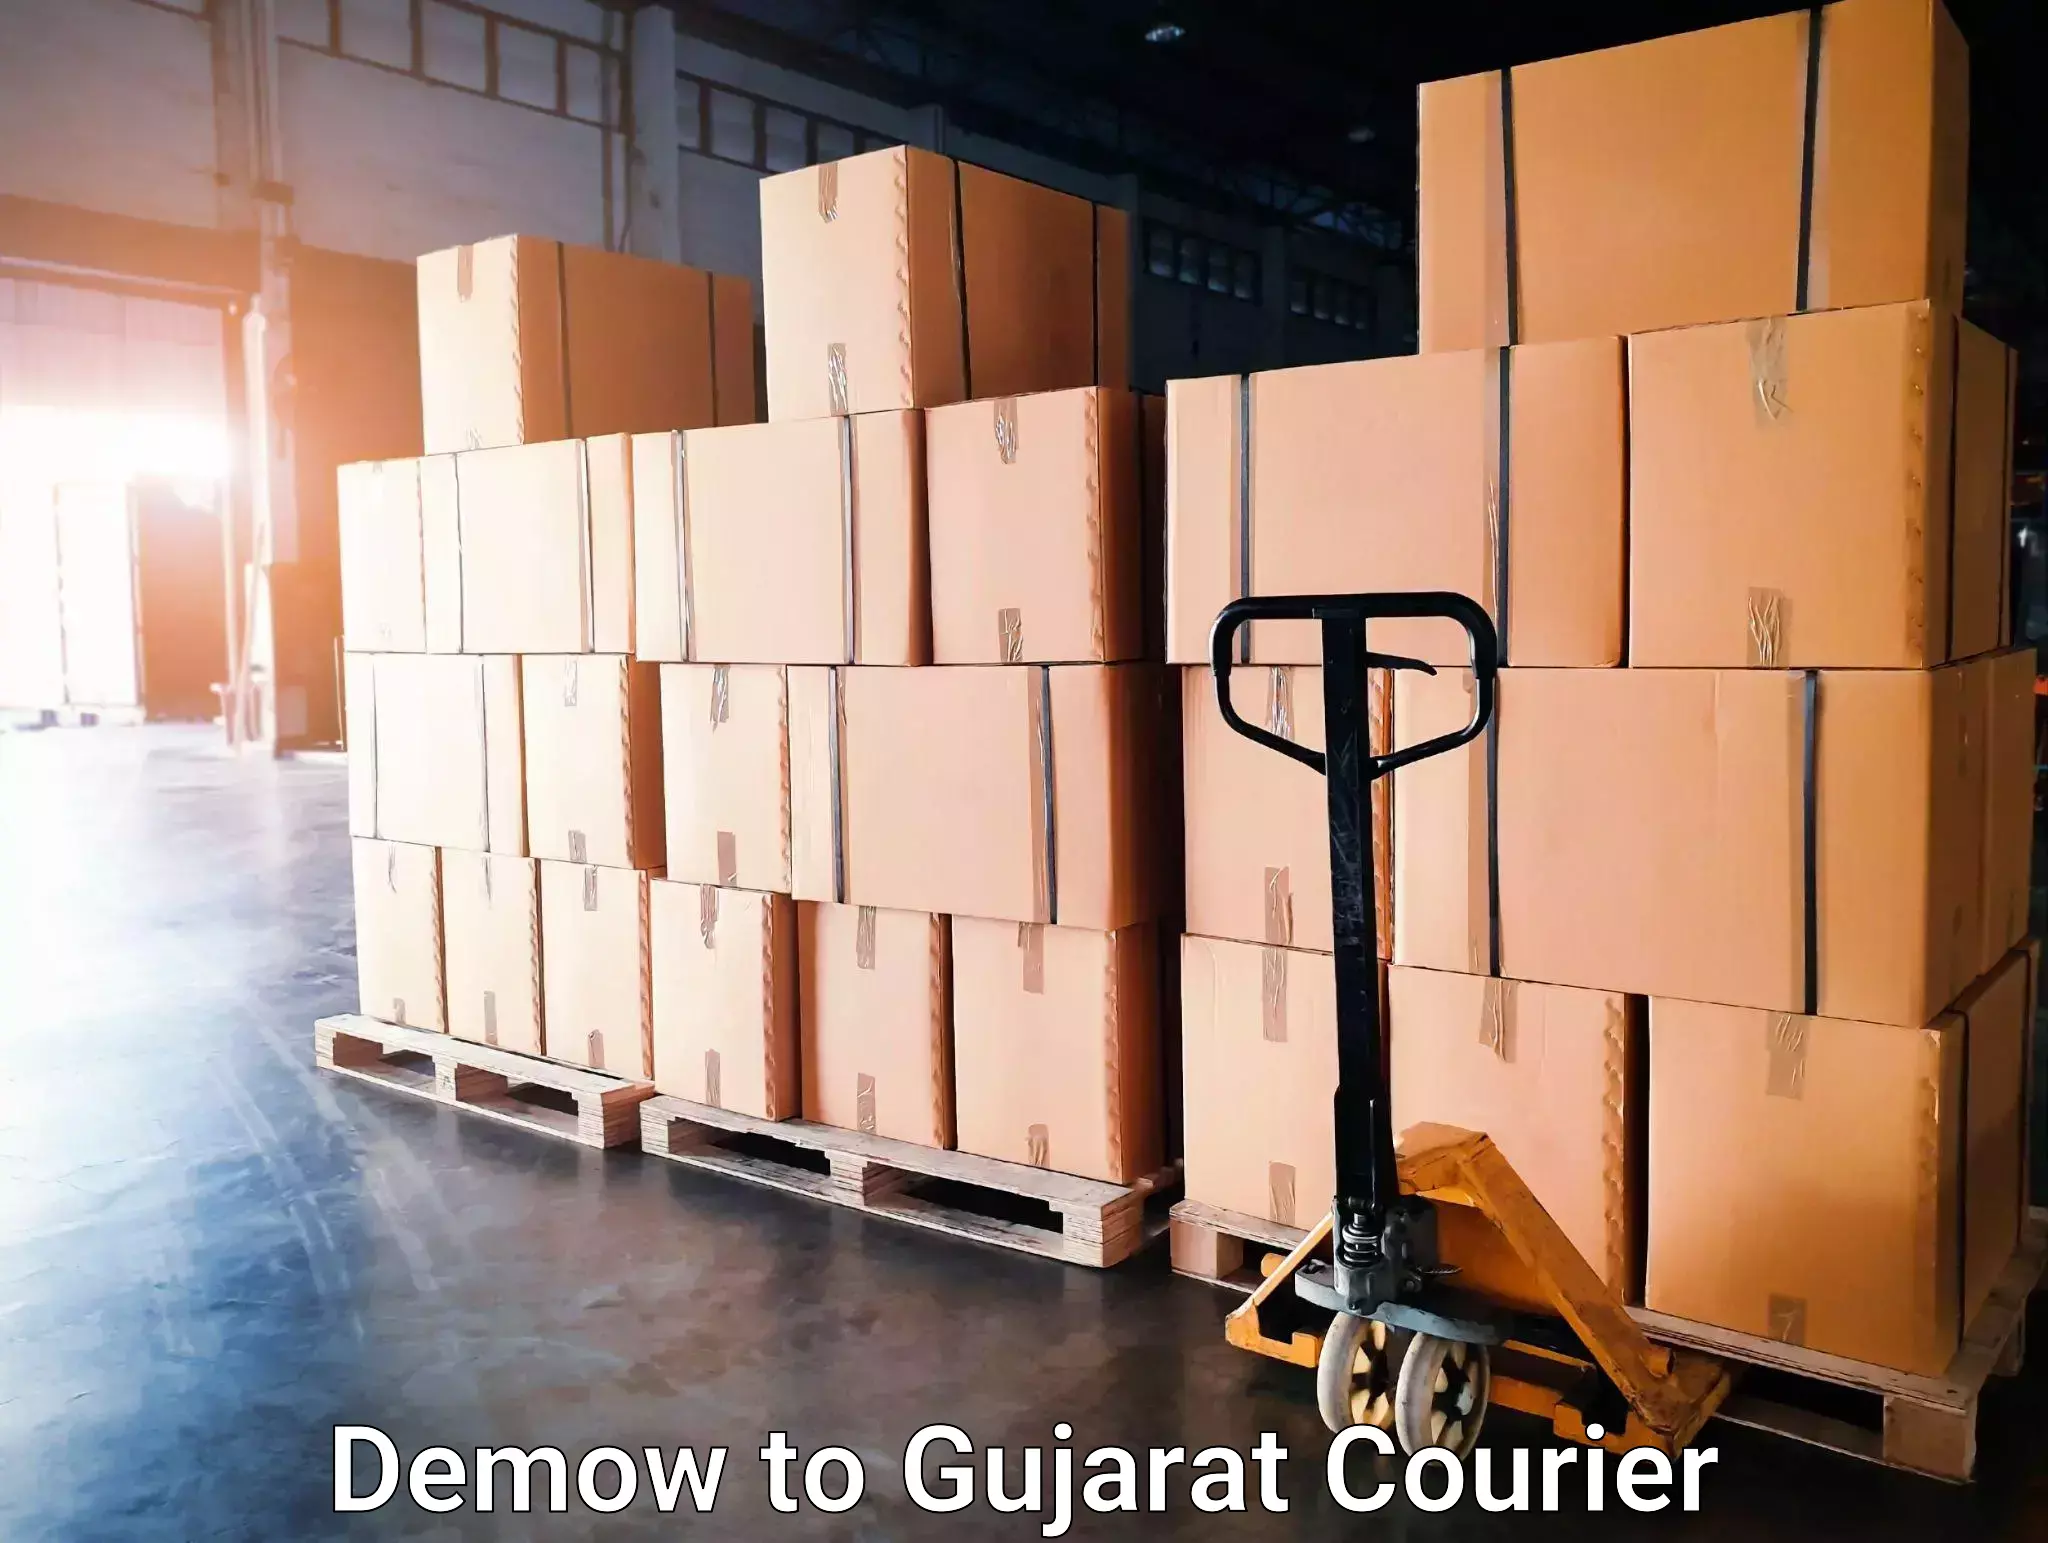 Residential courier service Demow to Patan Gujarat